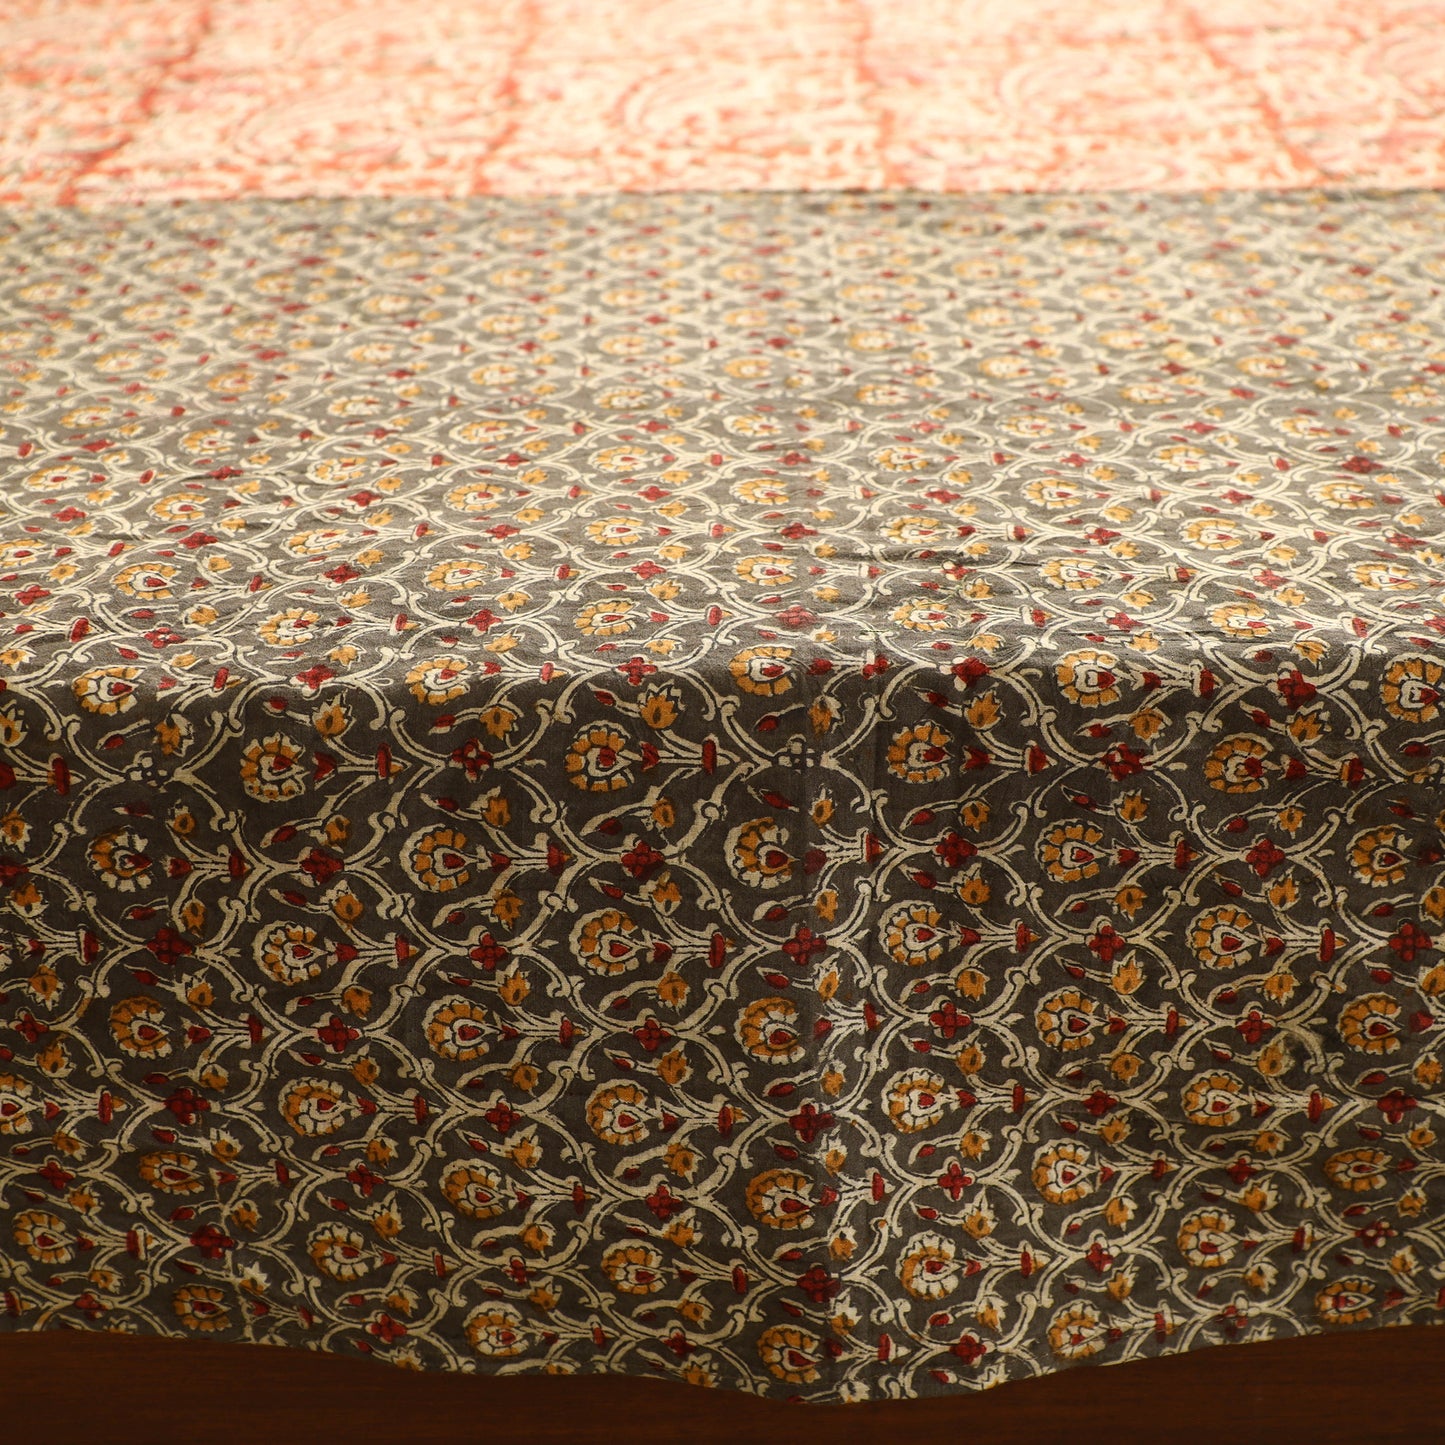 Brown - Kalamkari Block Printed Patchwork Cotton Double Bed Cover With Pillow Covers (108 x 90 in)